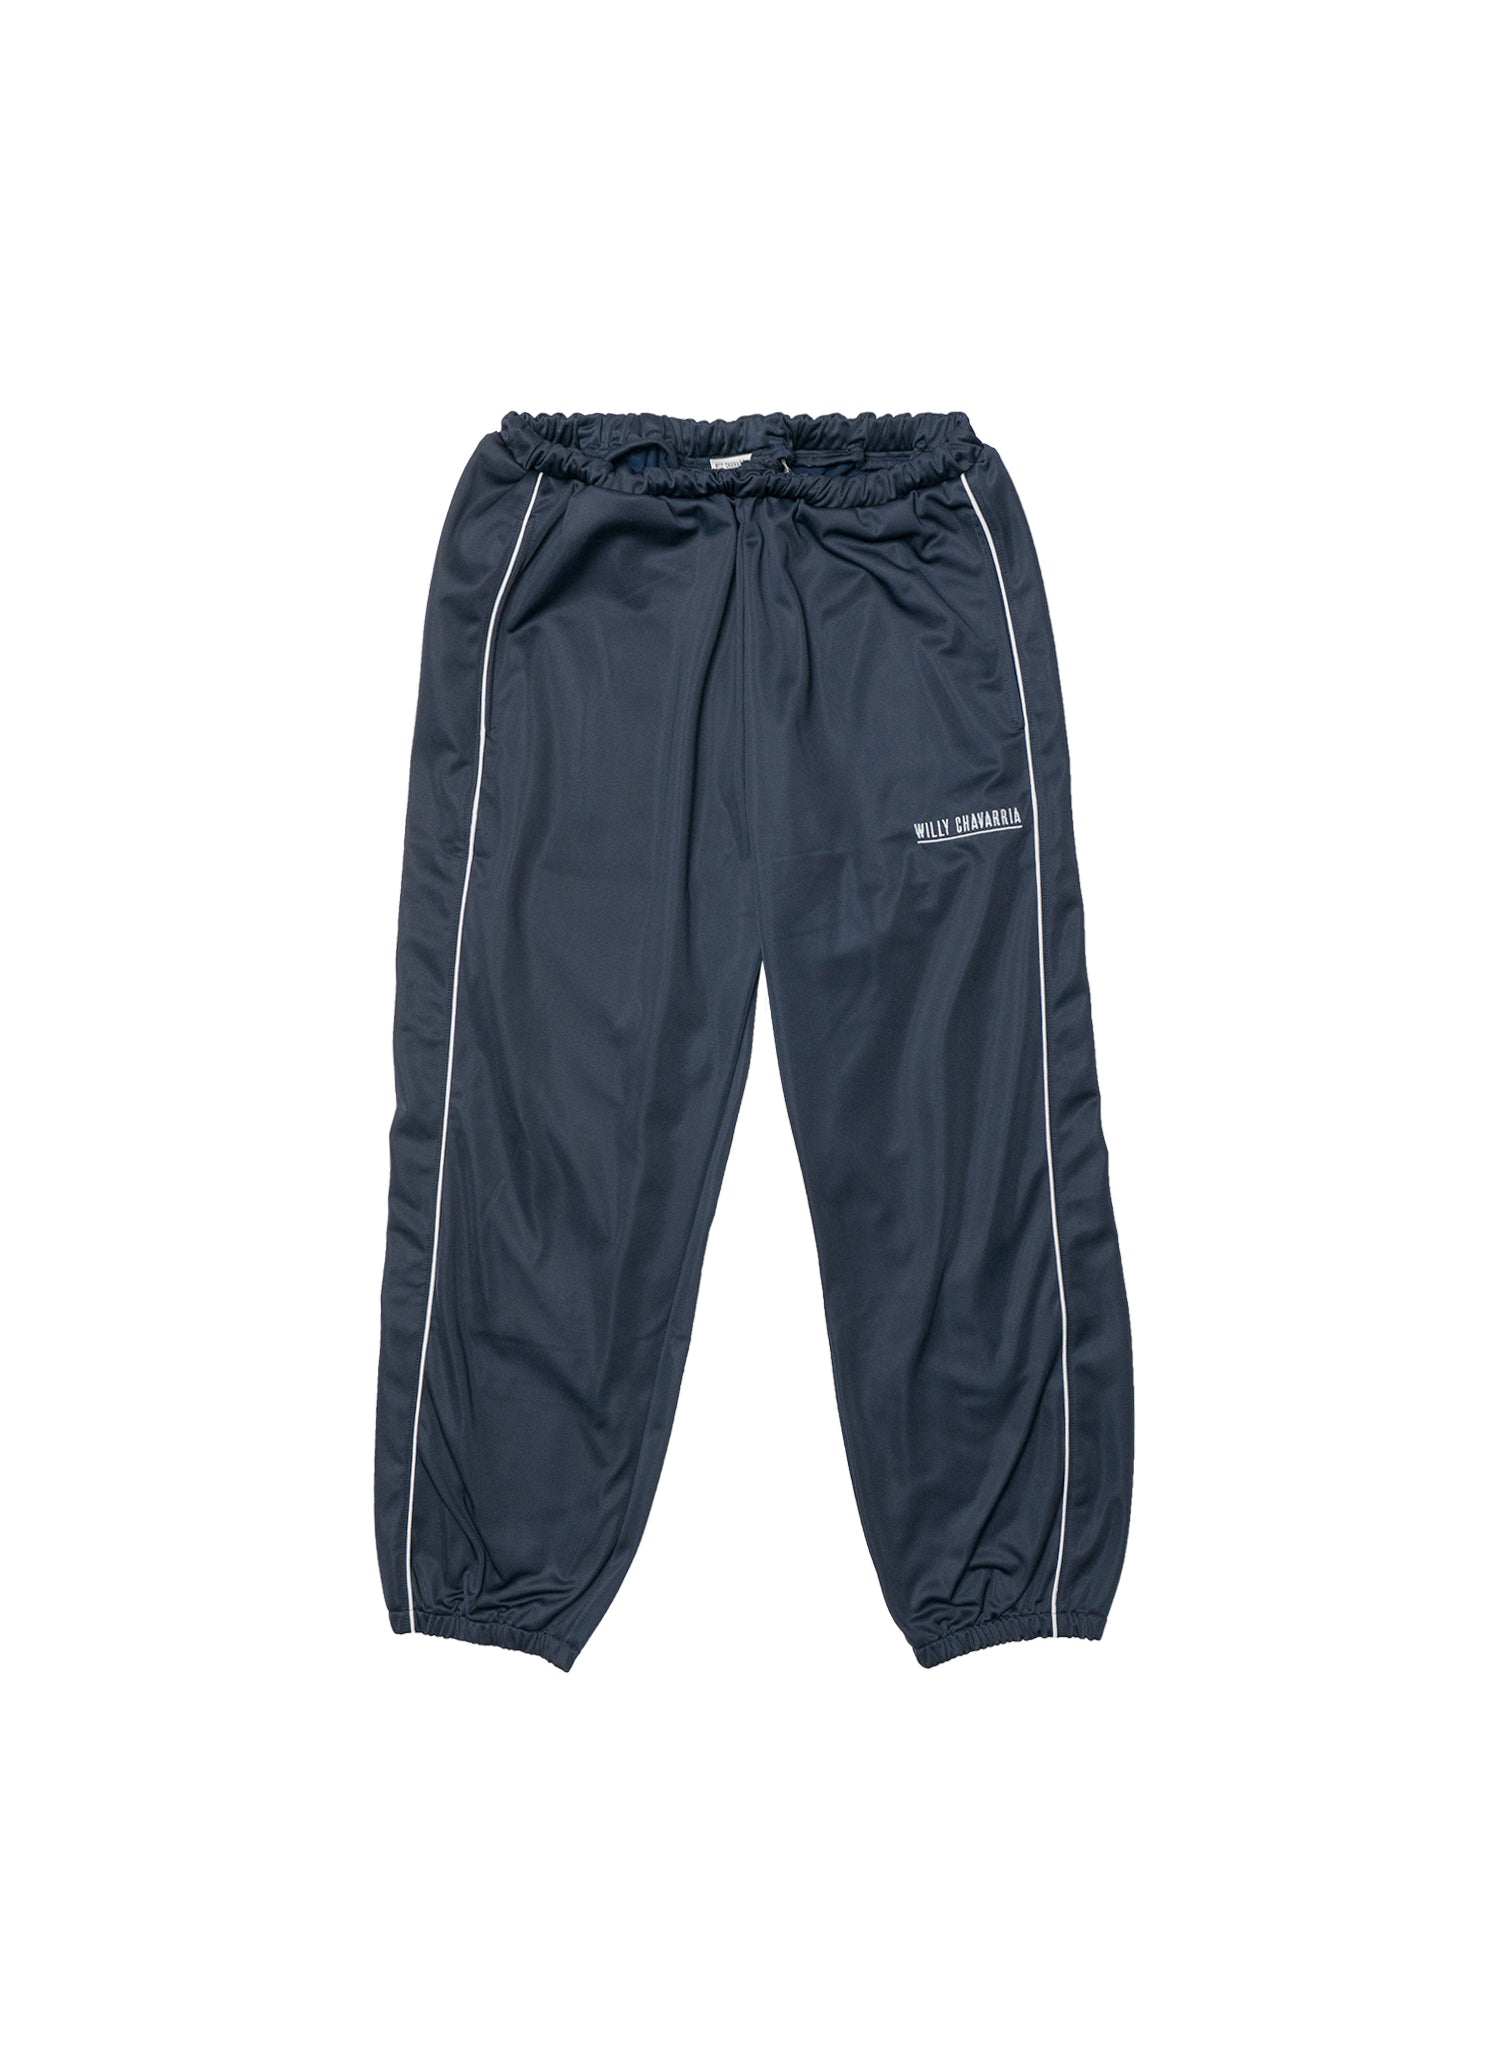 <span style="color: #f50b0b;">Last One</span> WILLY CHAVARRIA / BUFFALO TRACK PANT NAVY